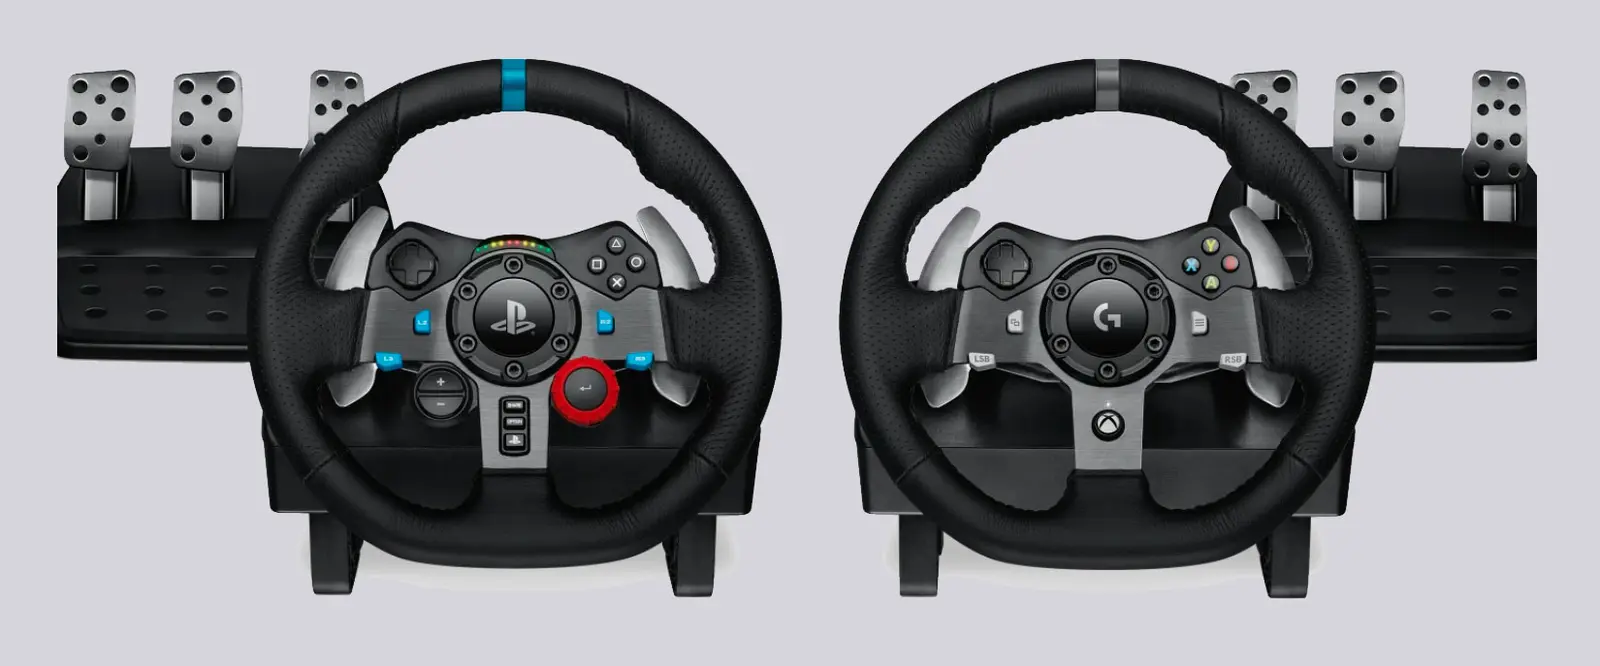 Best wheel for F1 2022 Logitech product image of the black G920 and G92 wheel.